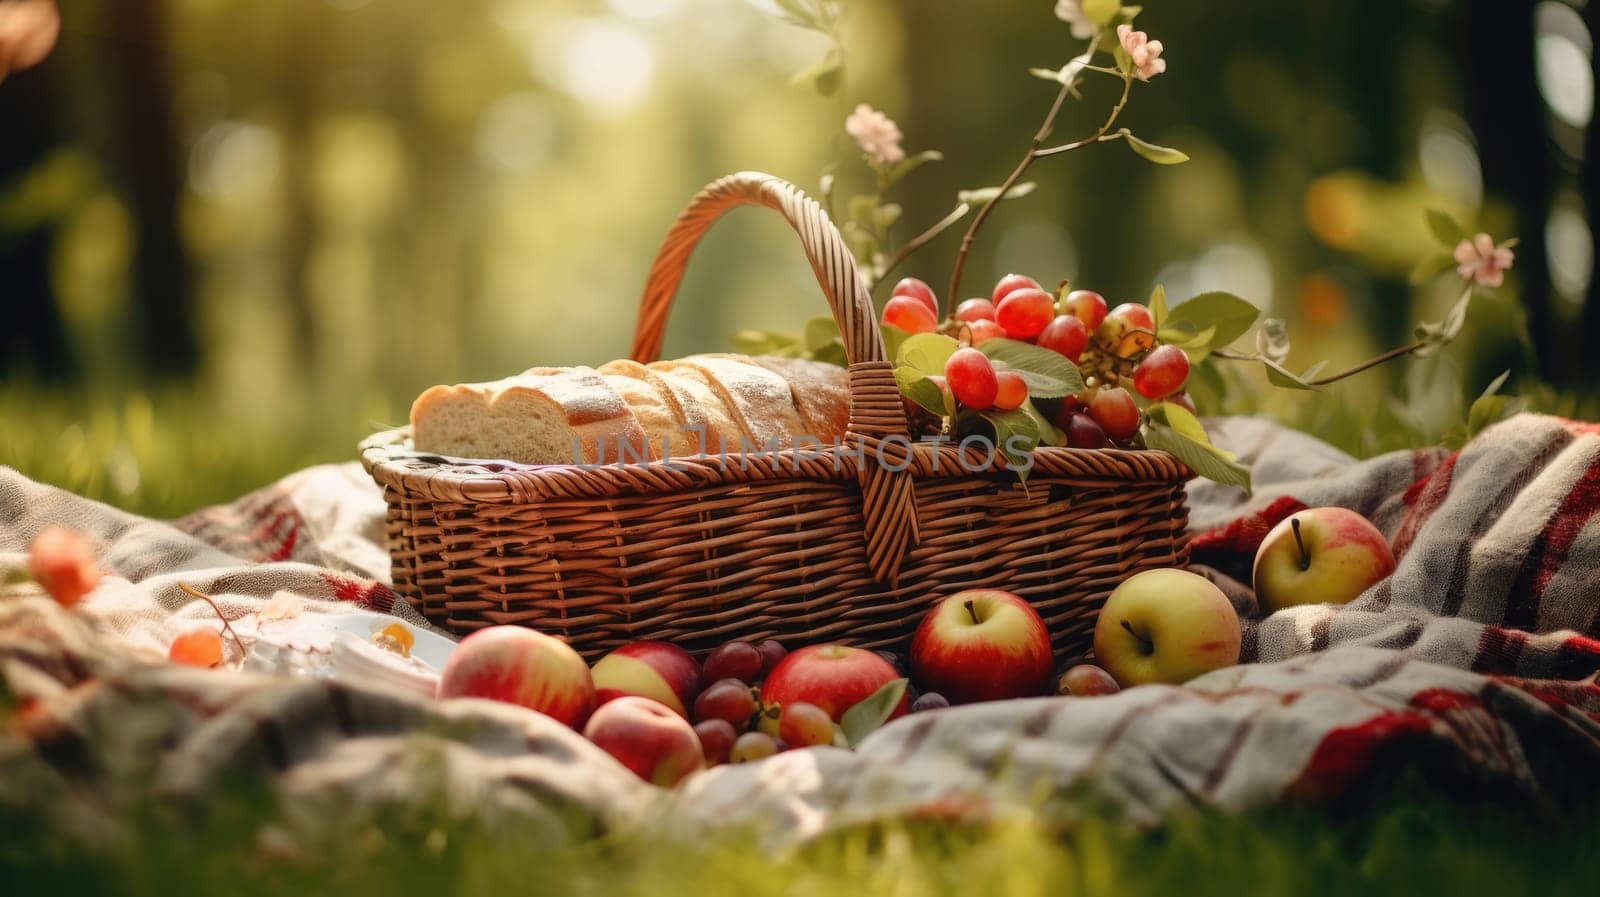 Picnic basket with fruit and bakery in garden. by natali_brill